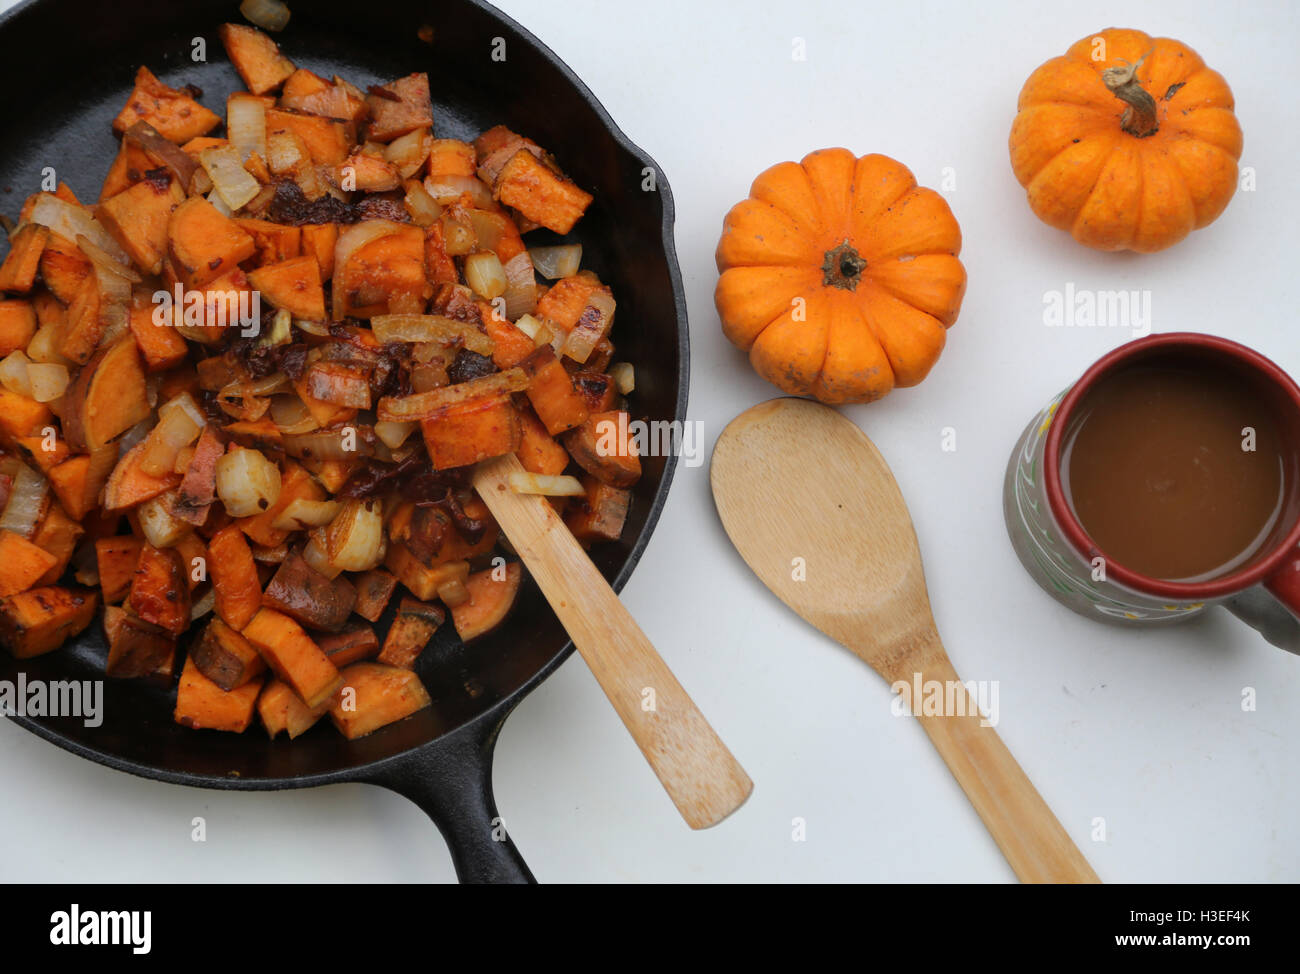 Orange Potatoes and pumpkins in pan with coffee cup. Fall Stock Photo